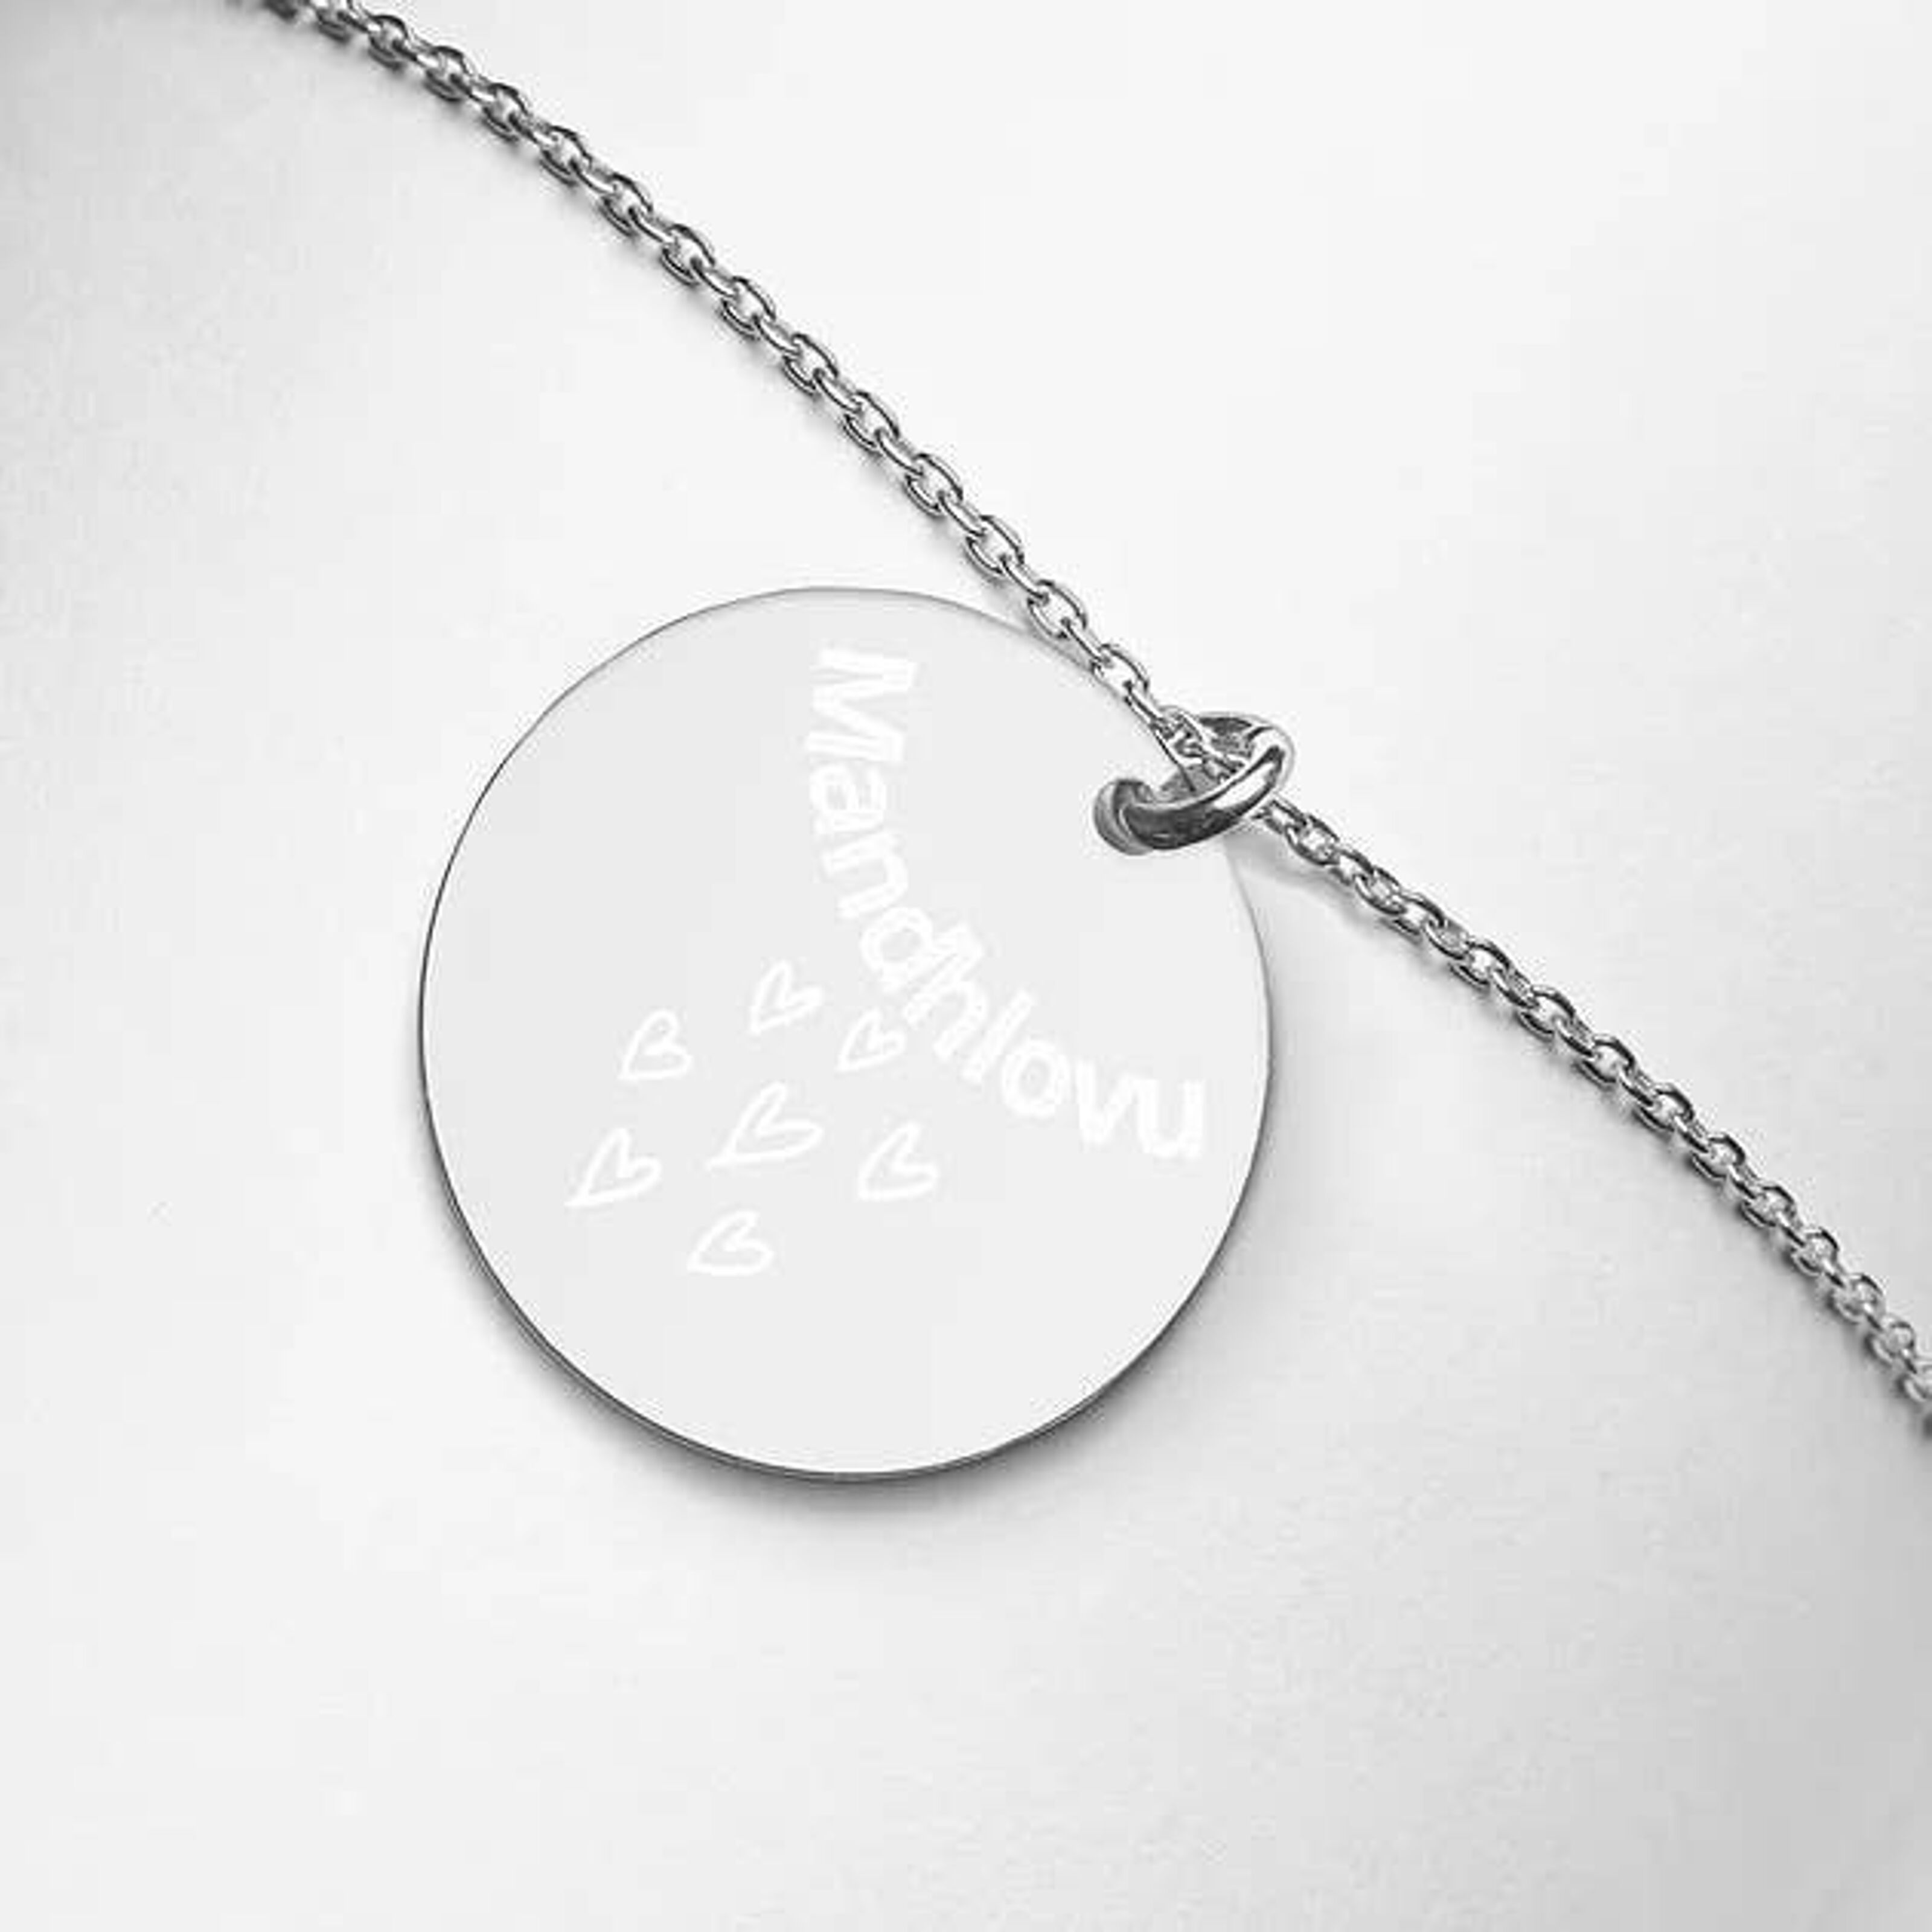 Cyber Security Red Team - Engraved Silver Disc Necklace White Rhodium Coating